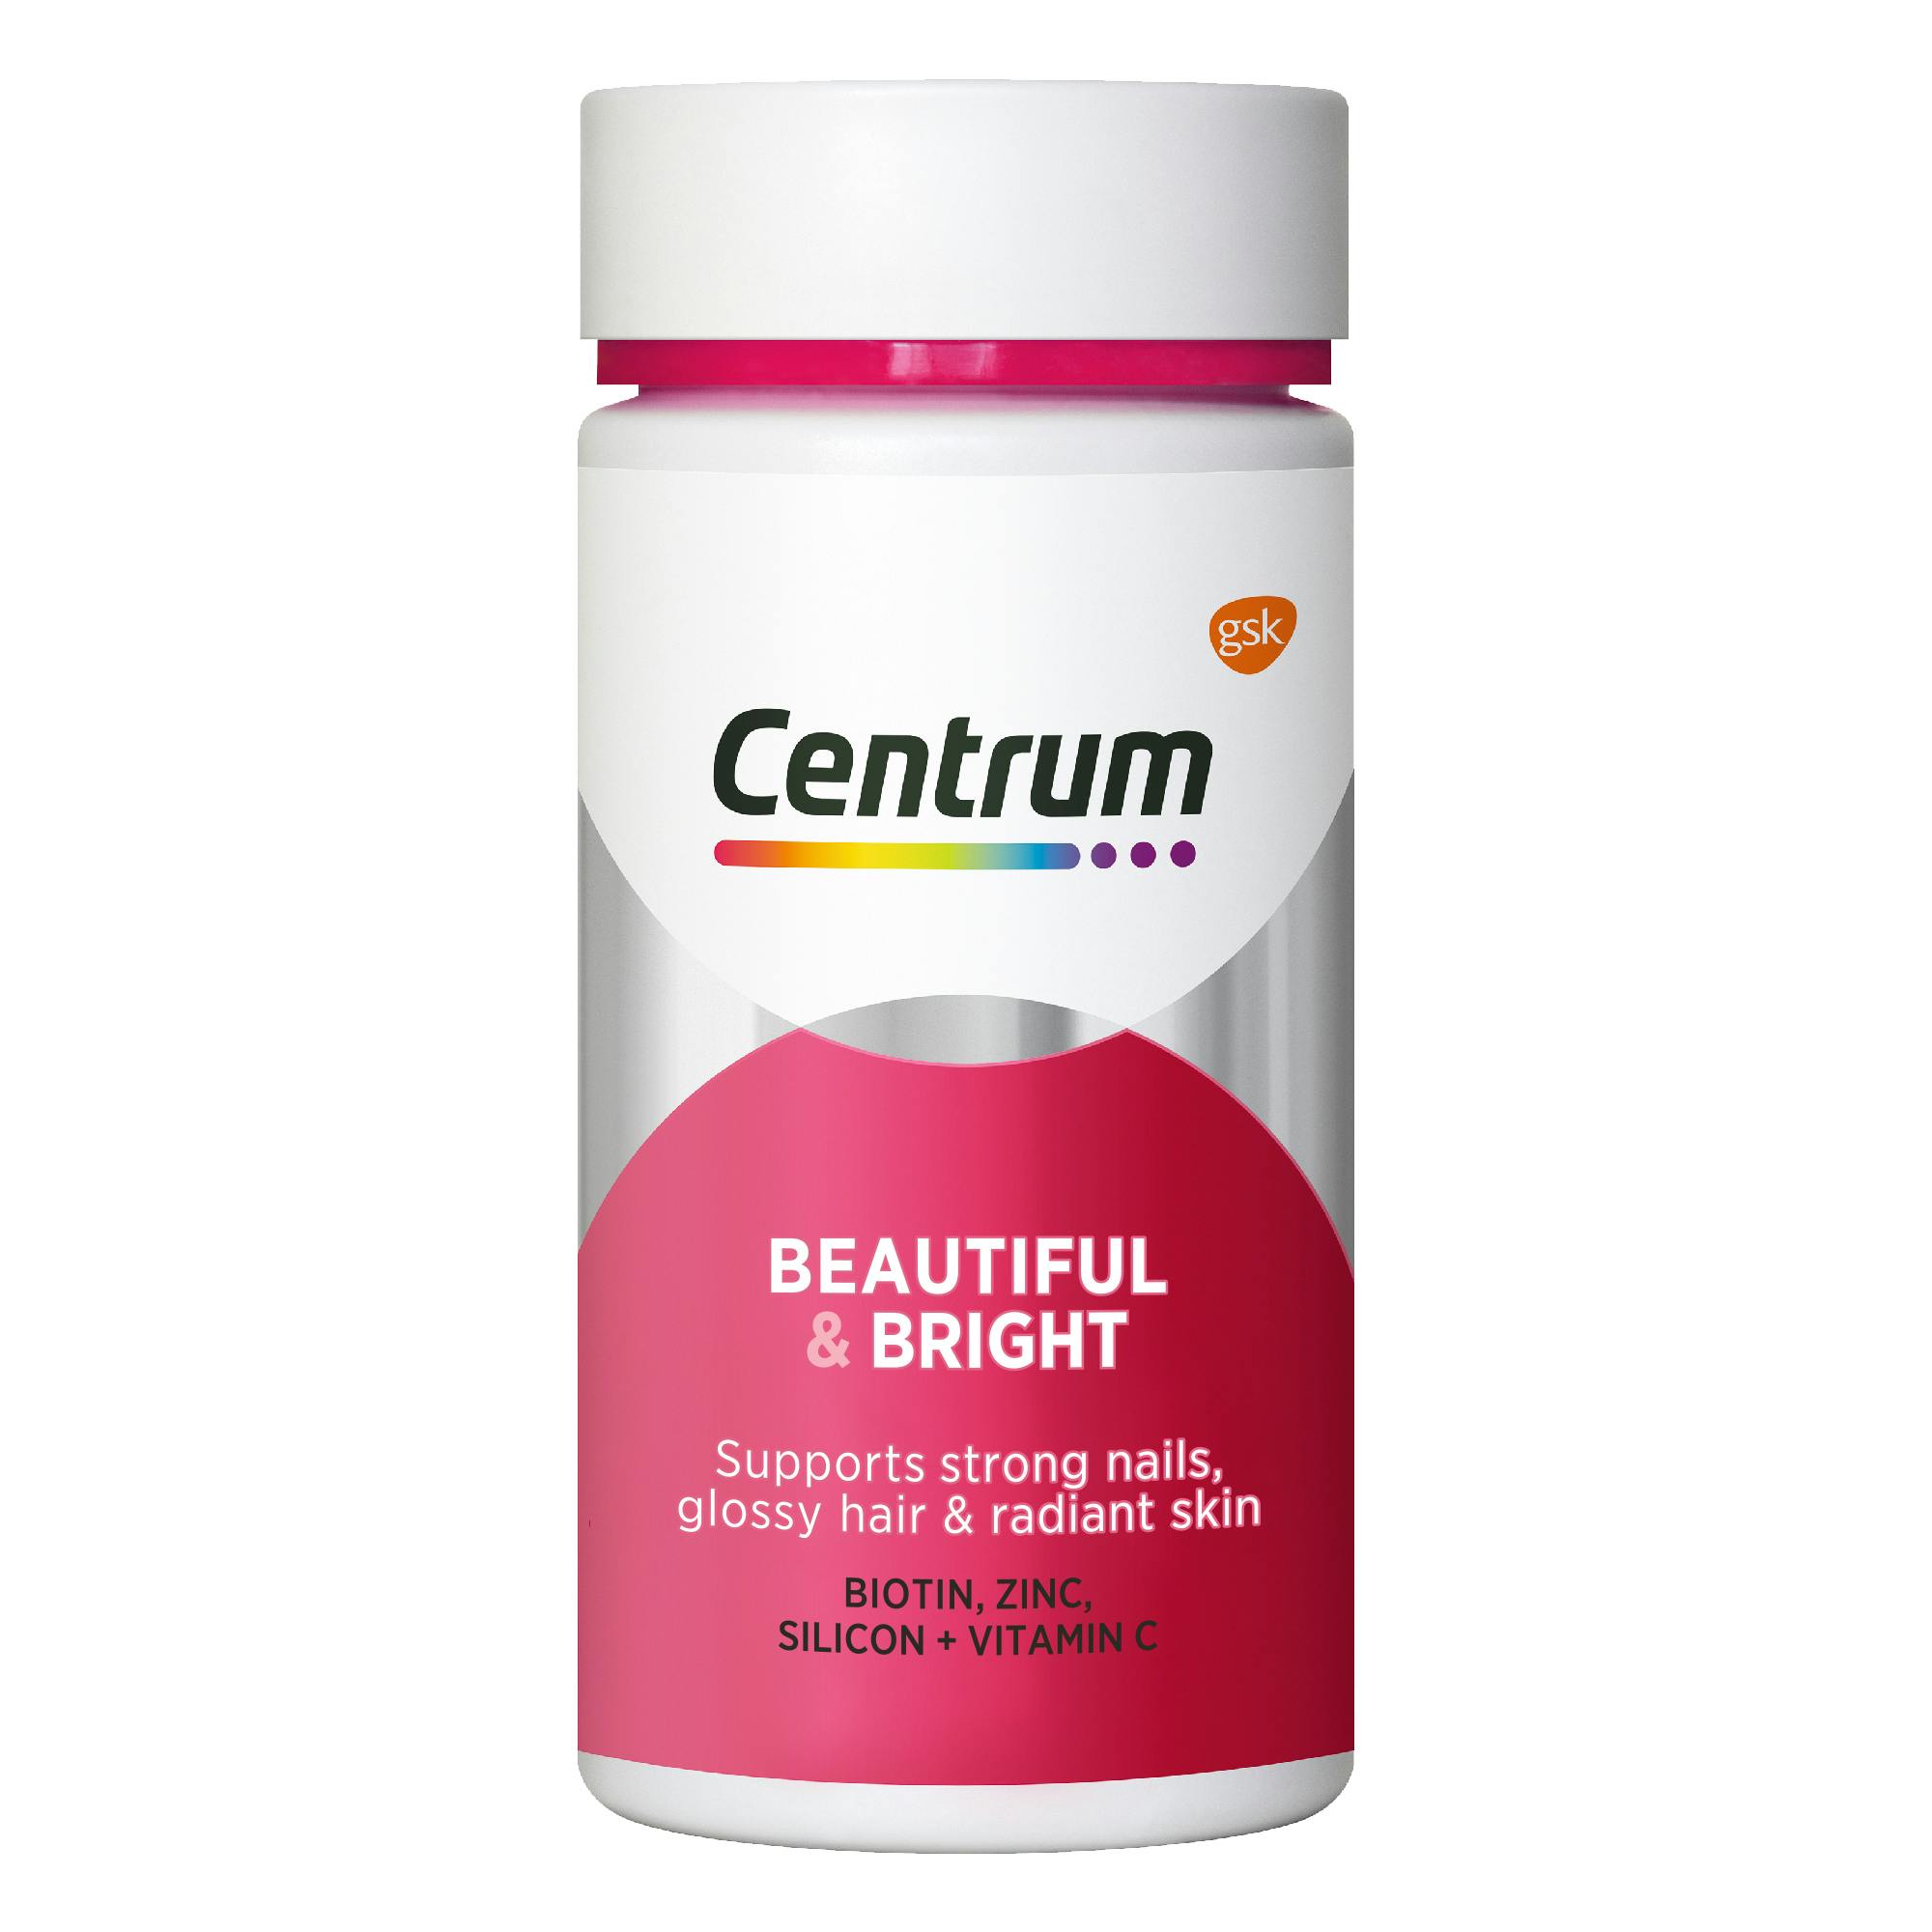 Bottle of Beautiful & Bright from the Centrum Benefits Blend (50 tablets).